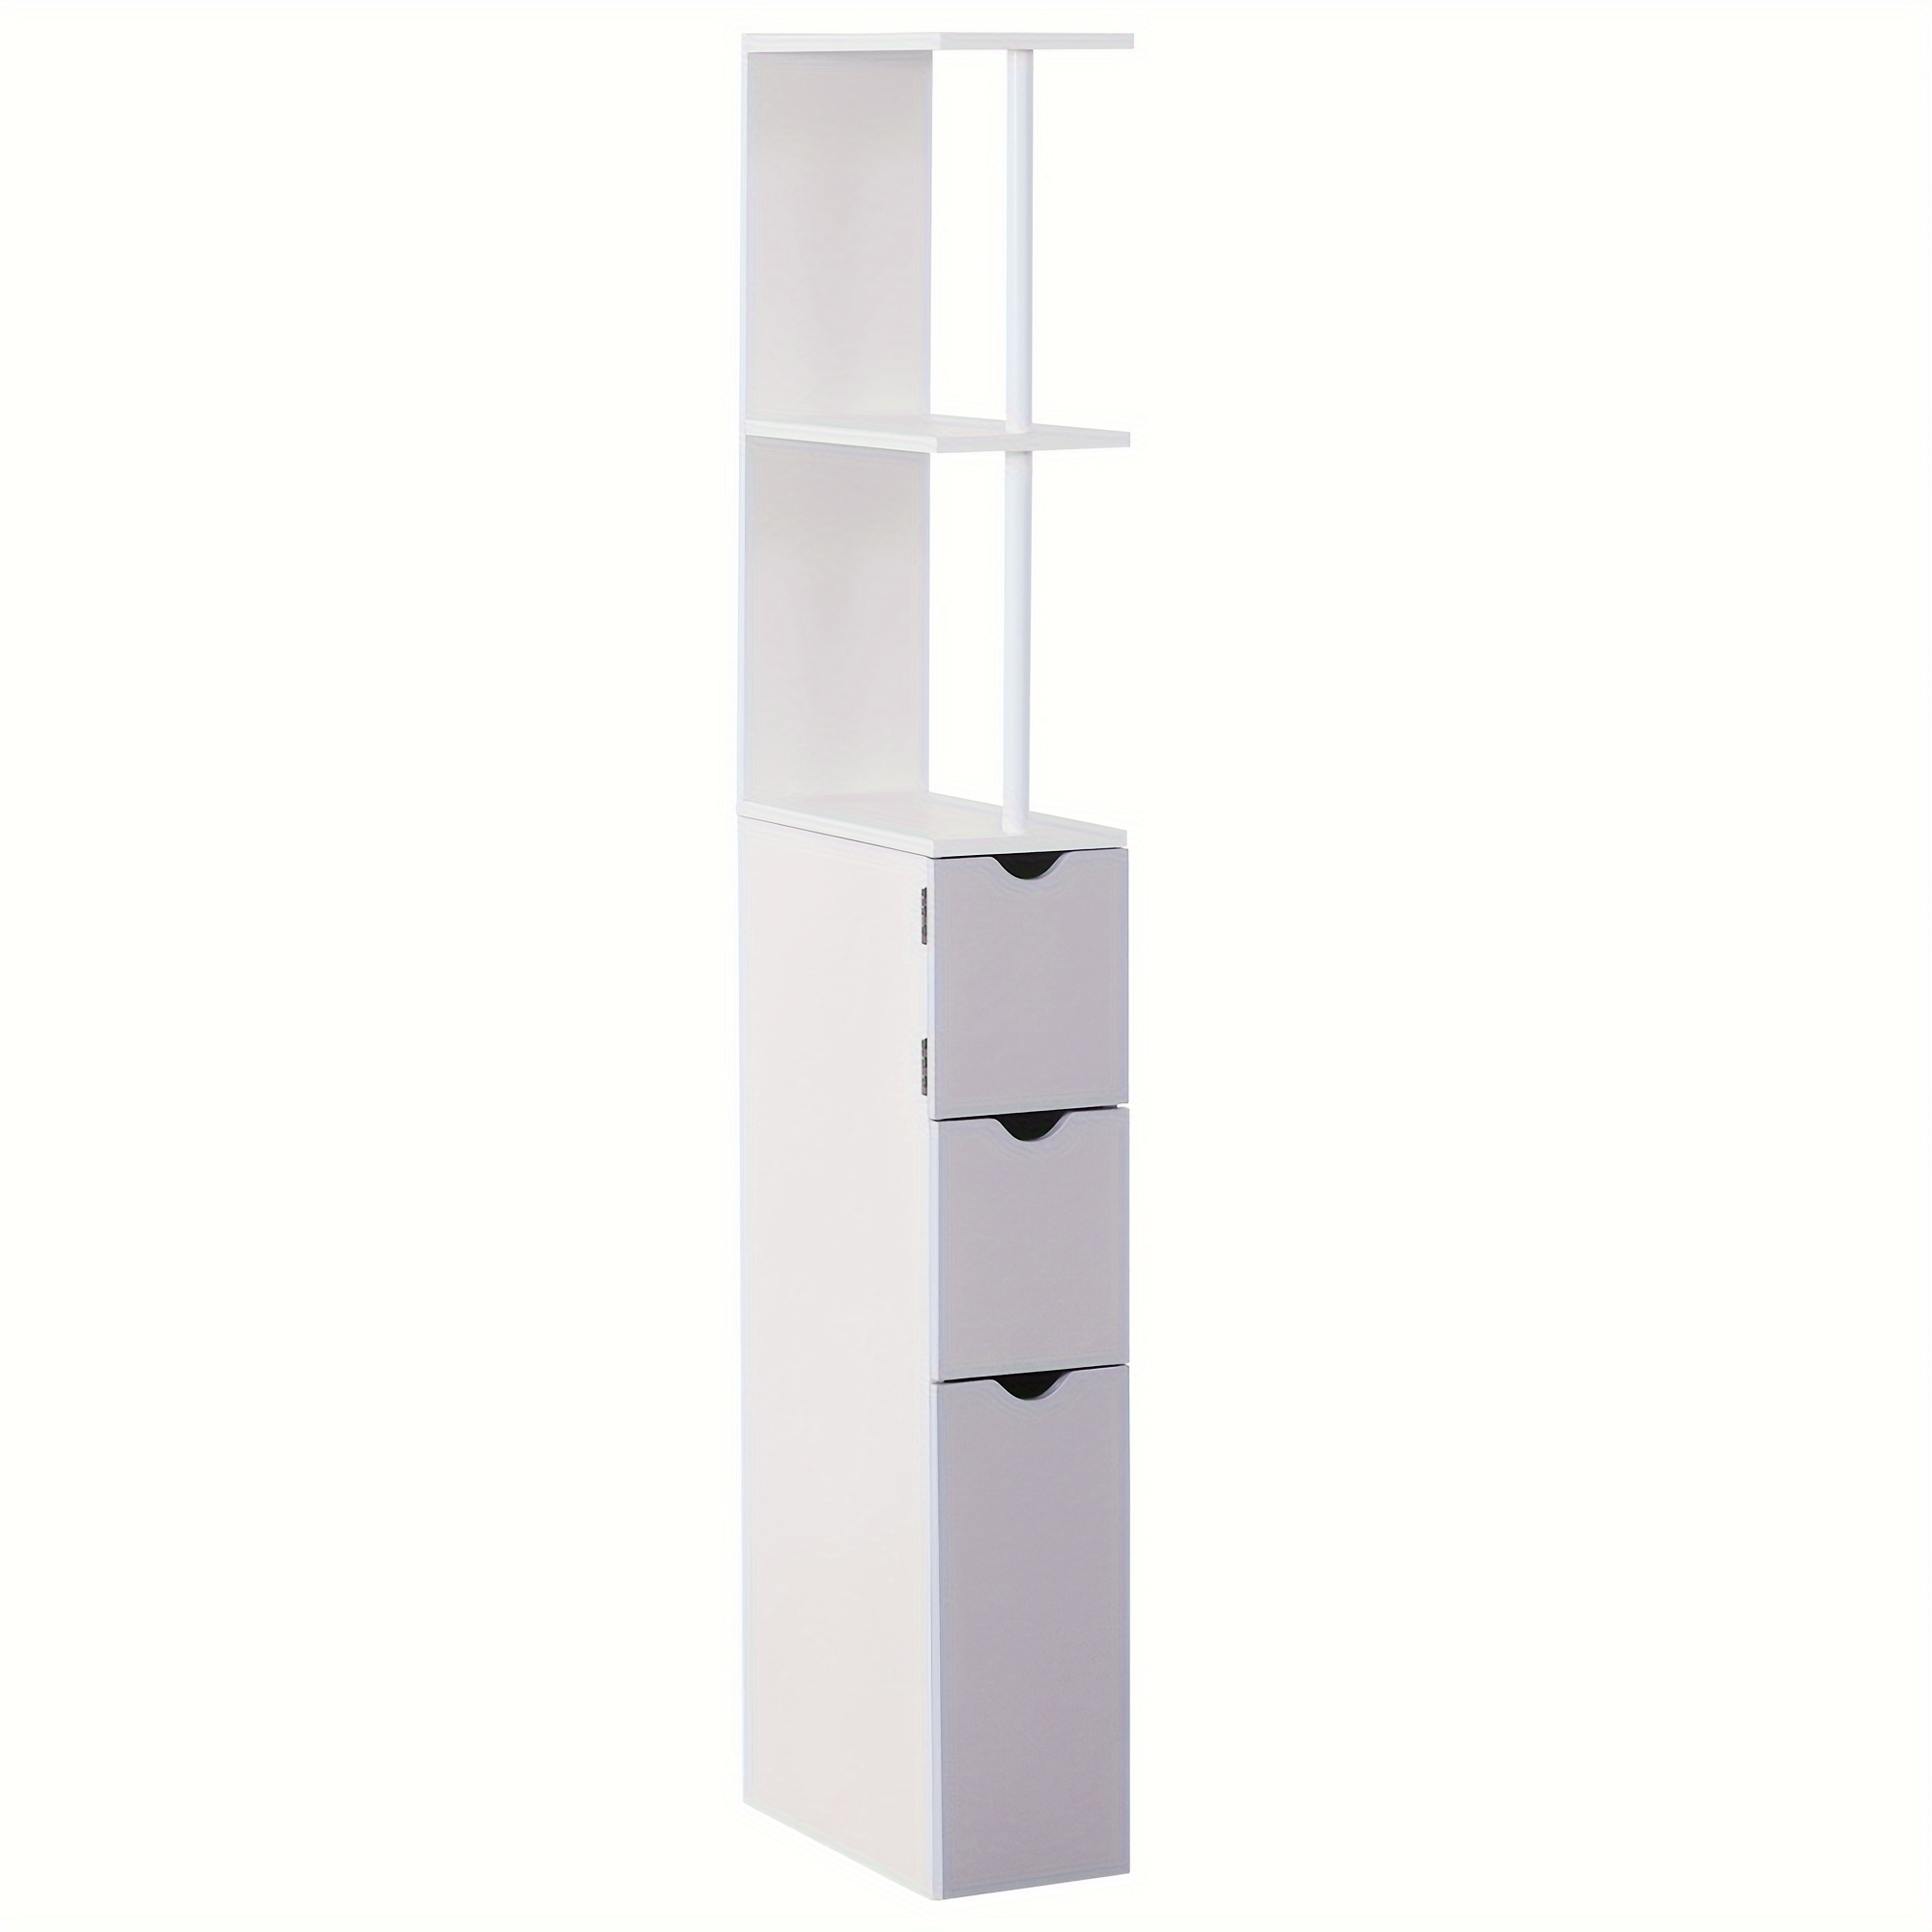 

Homcom 54" Tall Bathroom Storage Cabinet, Freestanding Linen Tower With 2-tier Shelf And Drawers, Narrow Side Floor Organizer, White